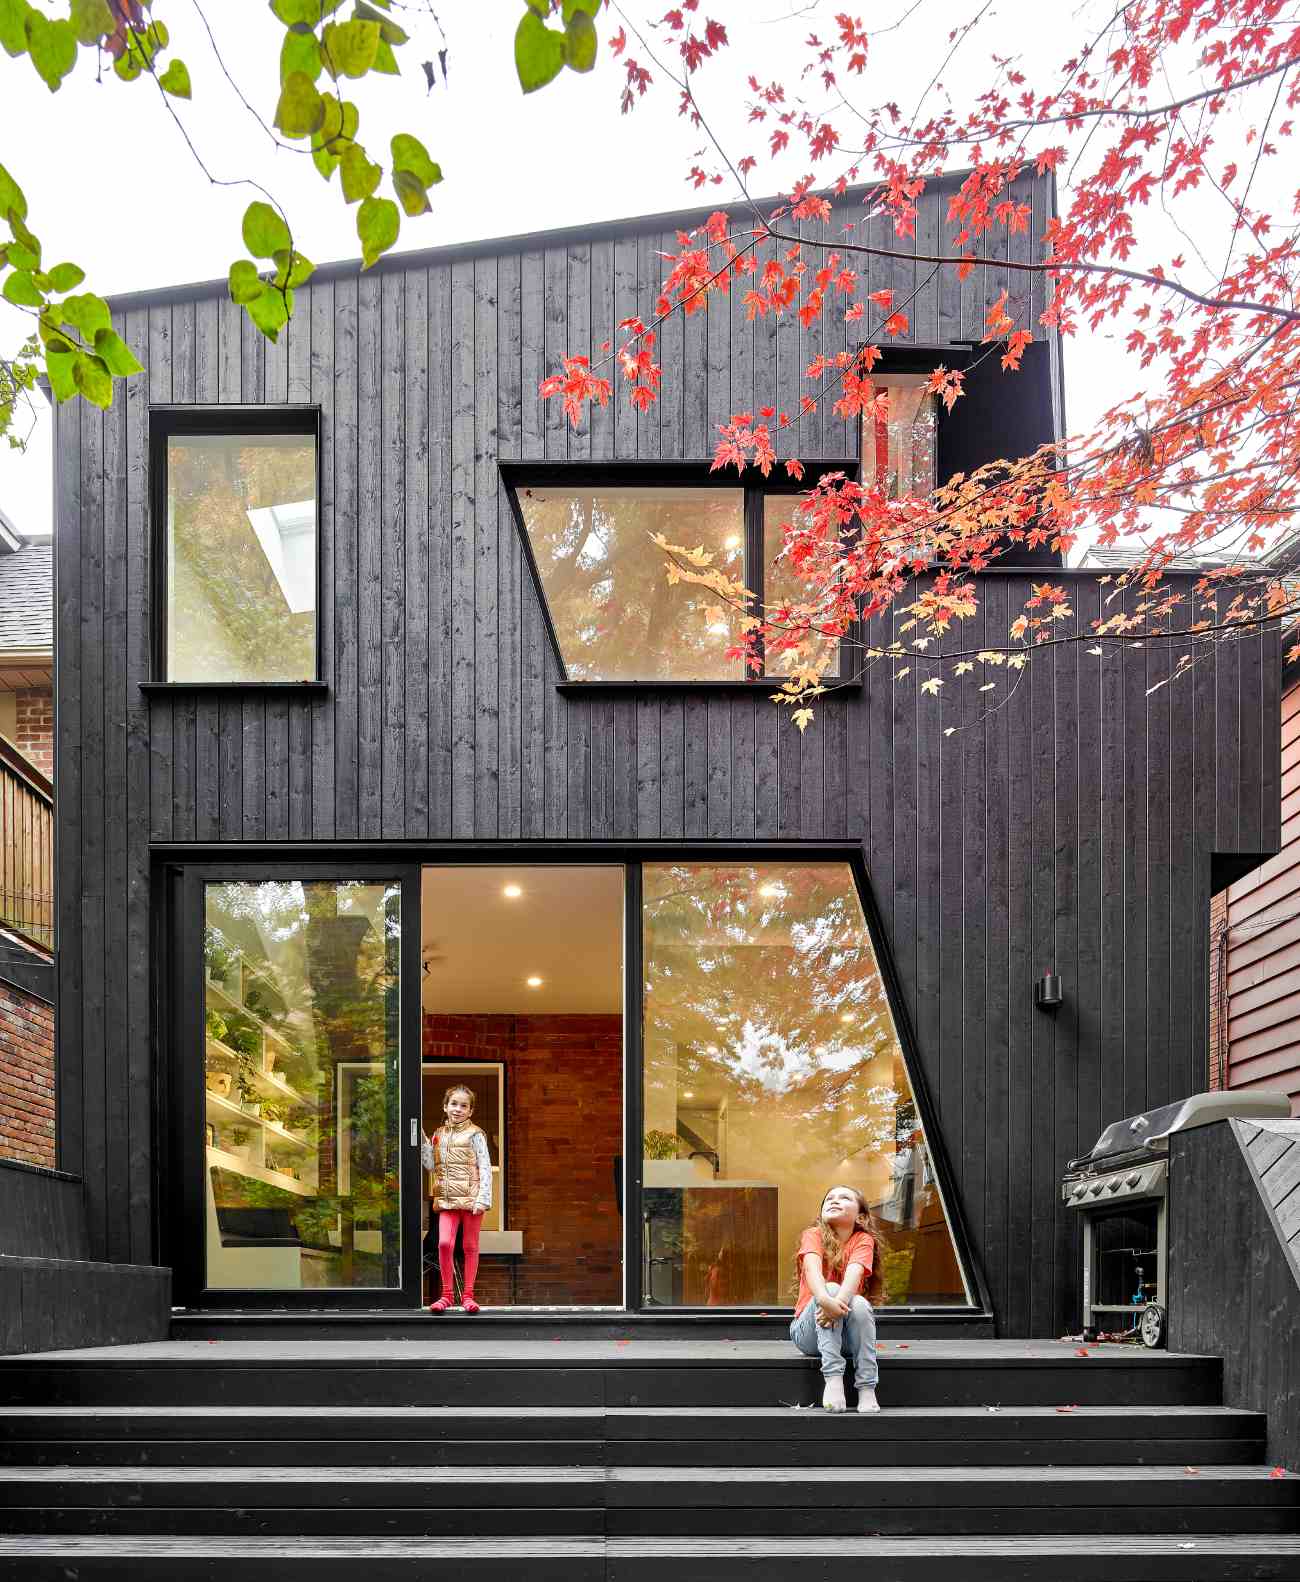 The non-traditional geometry plays off of the Edwardian's gabled roof. The painted black wood cladding is supplied by Cape Cod Finished Wood Siding, while  pressure treated wood was used for the deck and stained black to match.